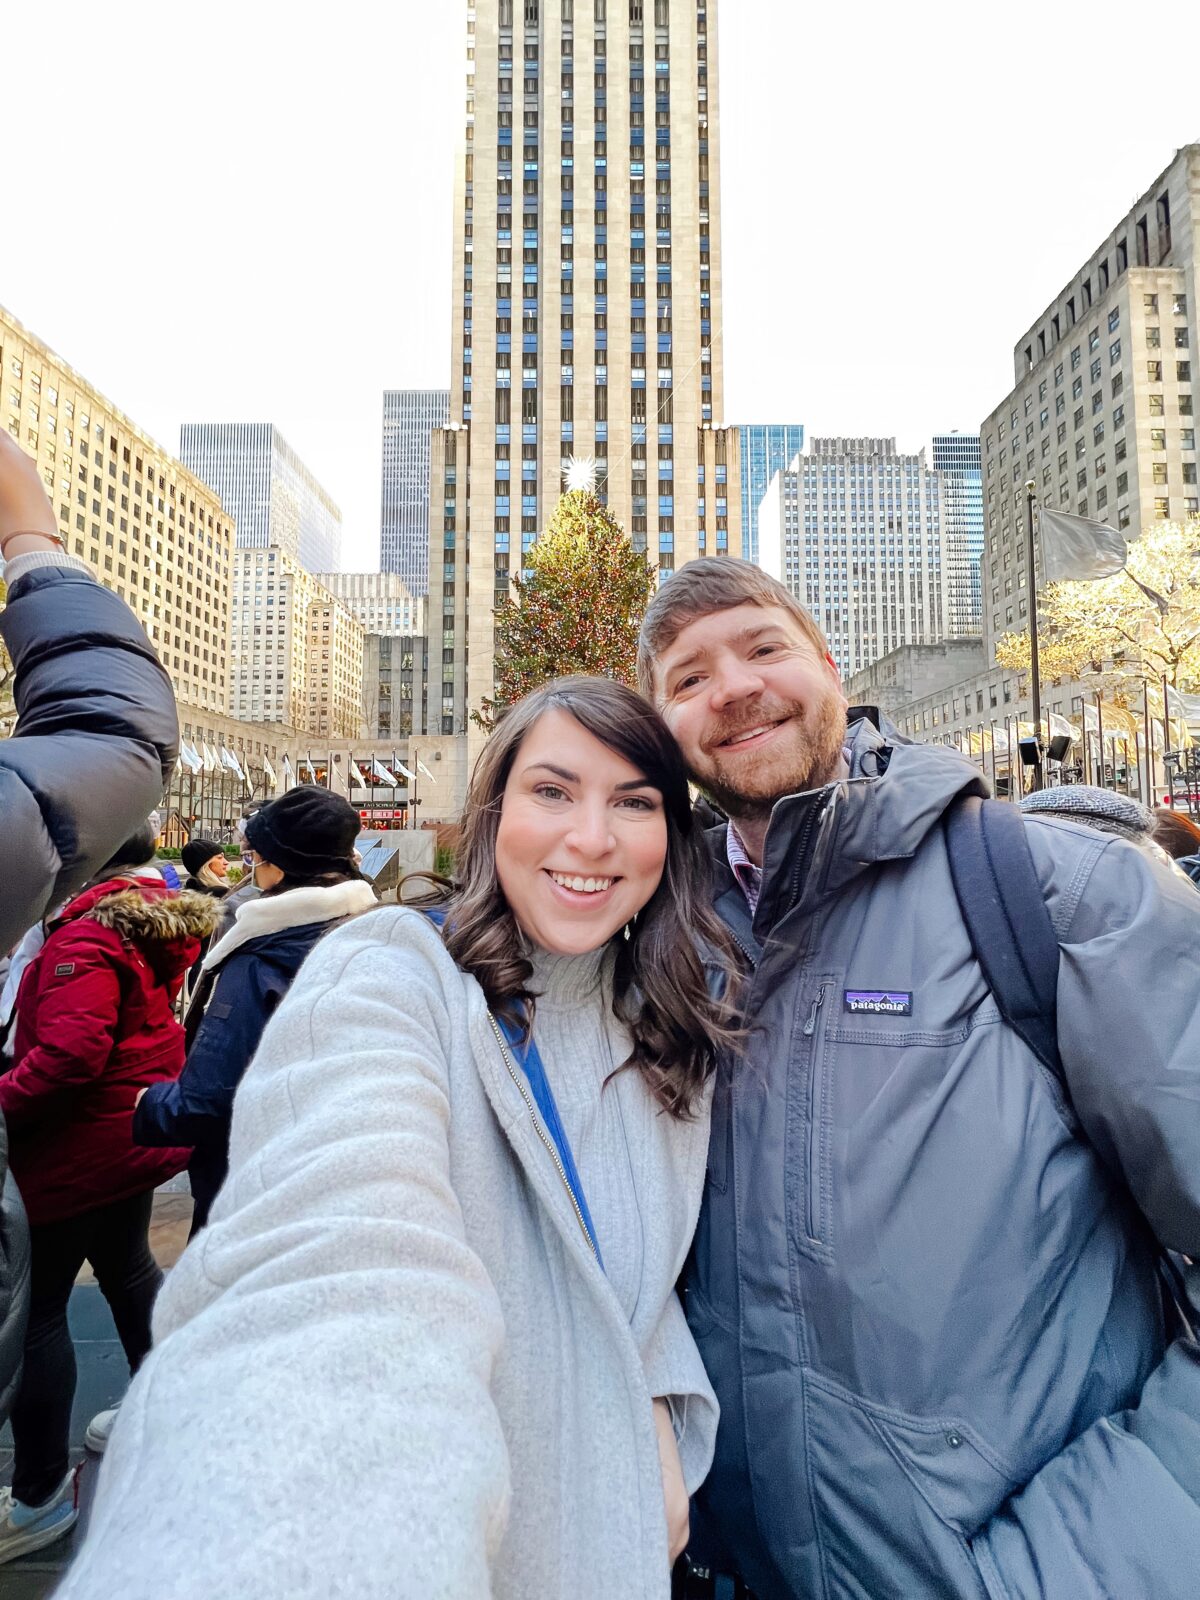 Brittney Naylor and John taking a selfie in front of the Rockefeller Christmas Tree and Plaza. NYC Christmastime Bucket List things to do.